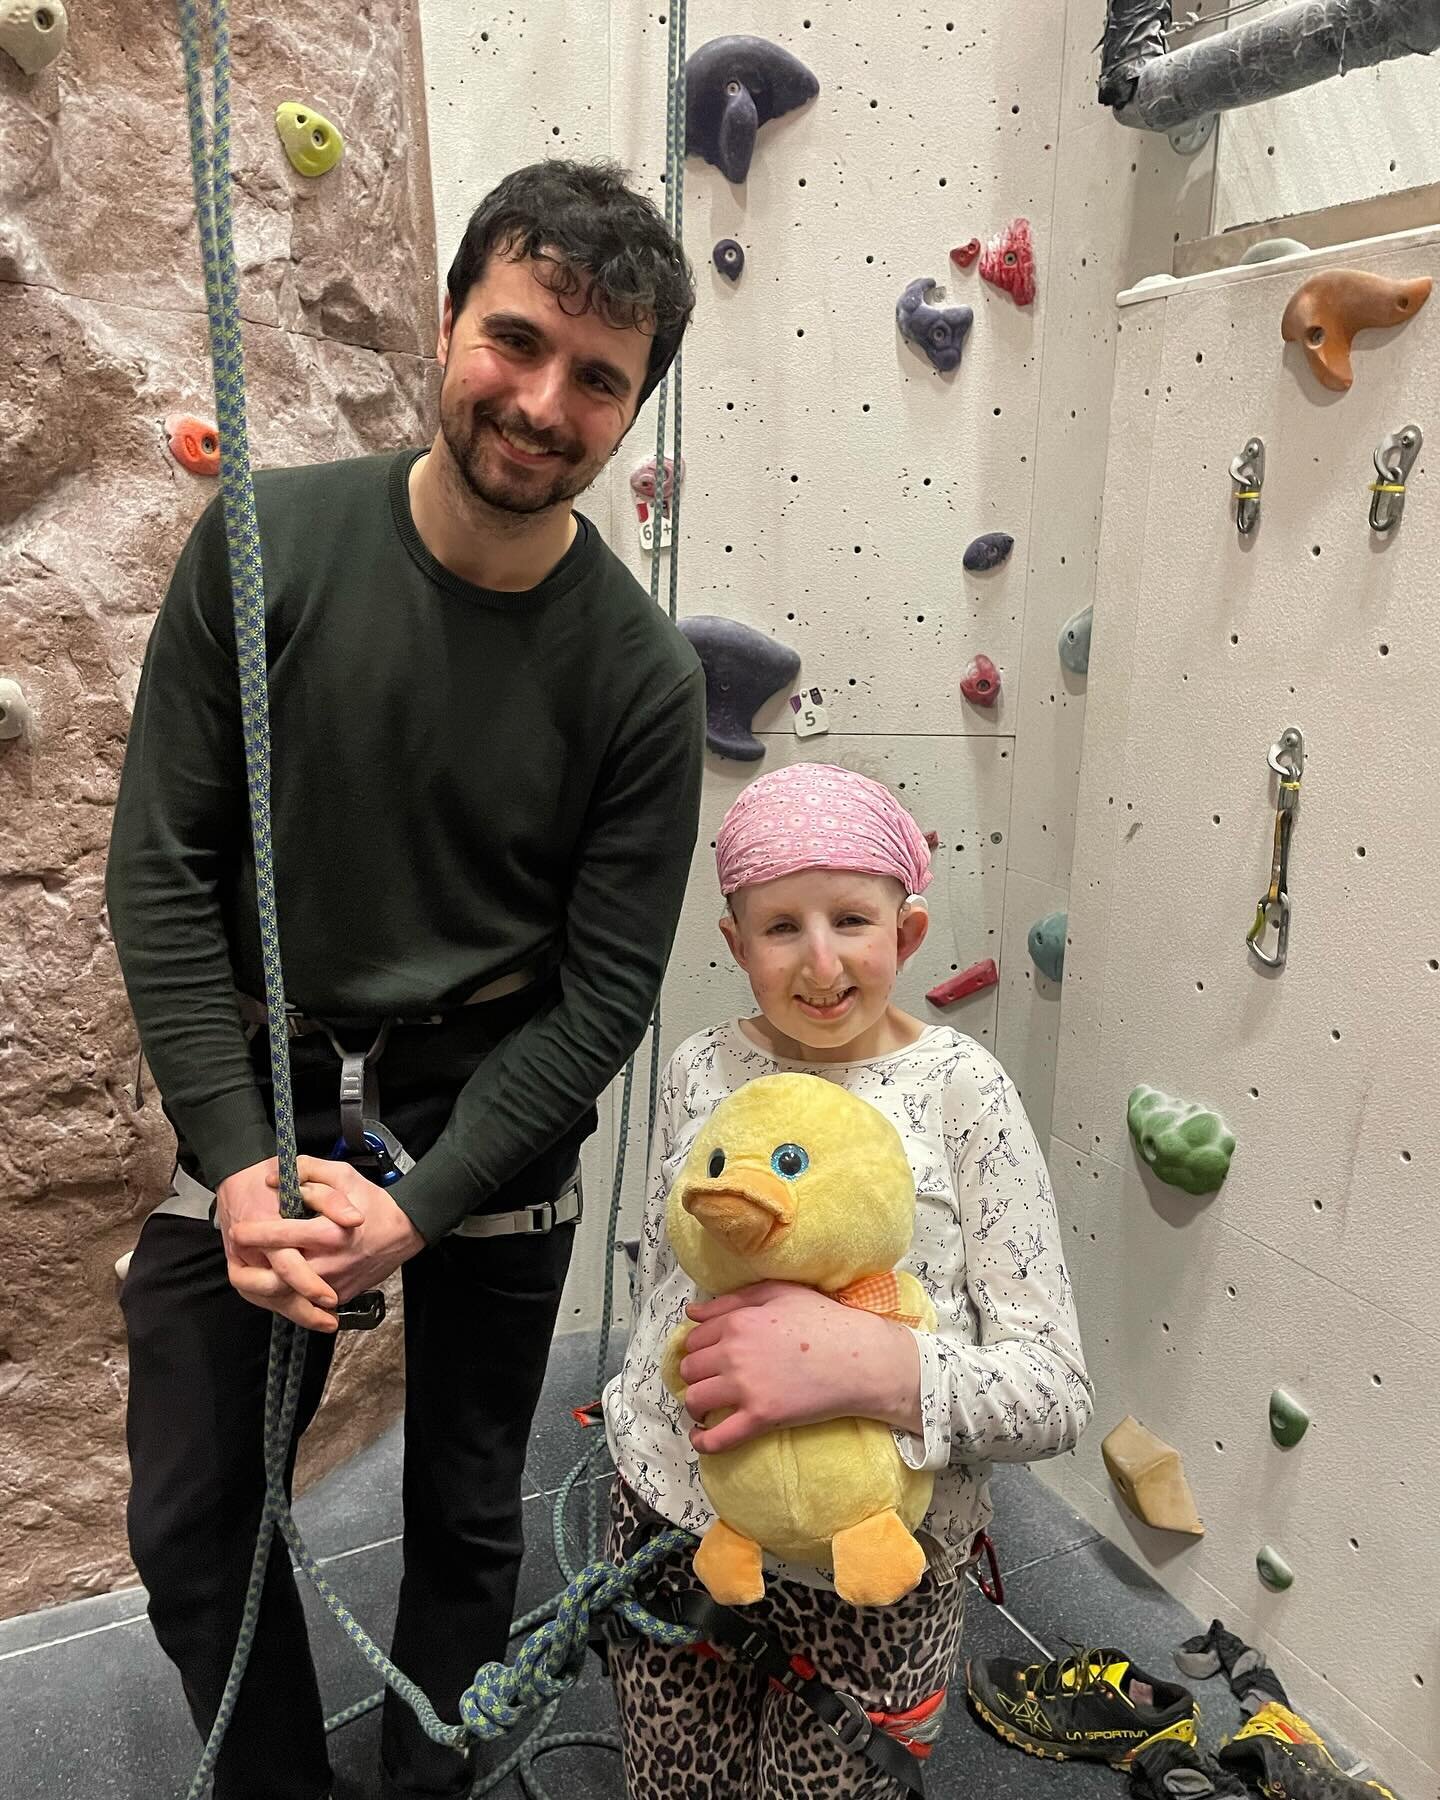 Charlie here taking over the instagram again! 

Fantastic session tonight with lots of great climbing, and a failed gymnastics routine from Joe 🤣